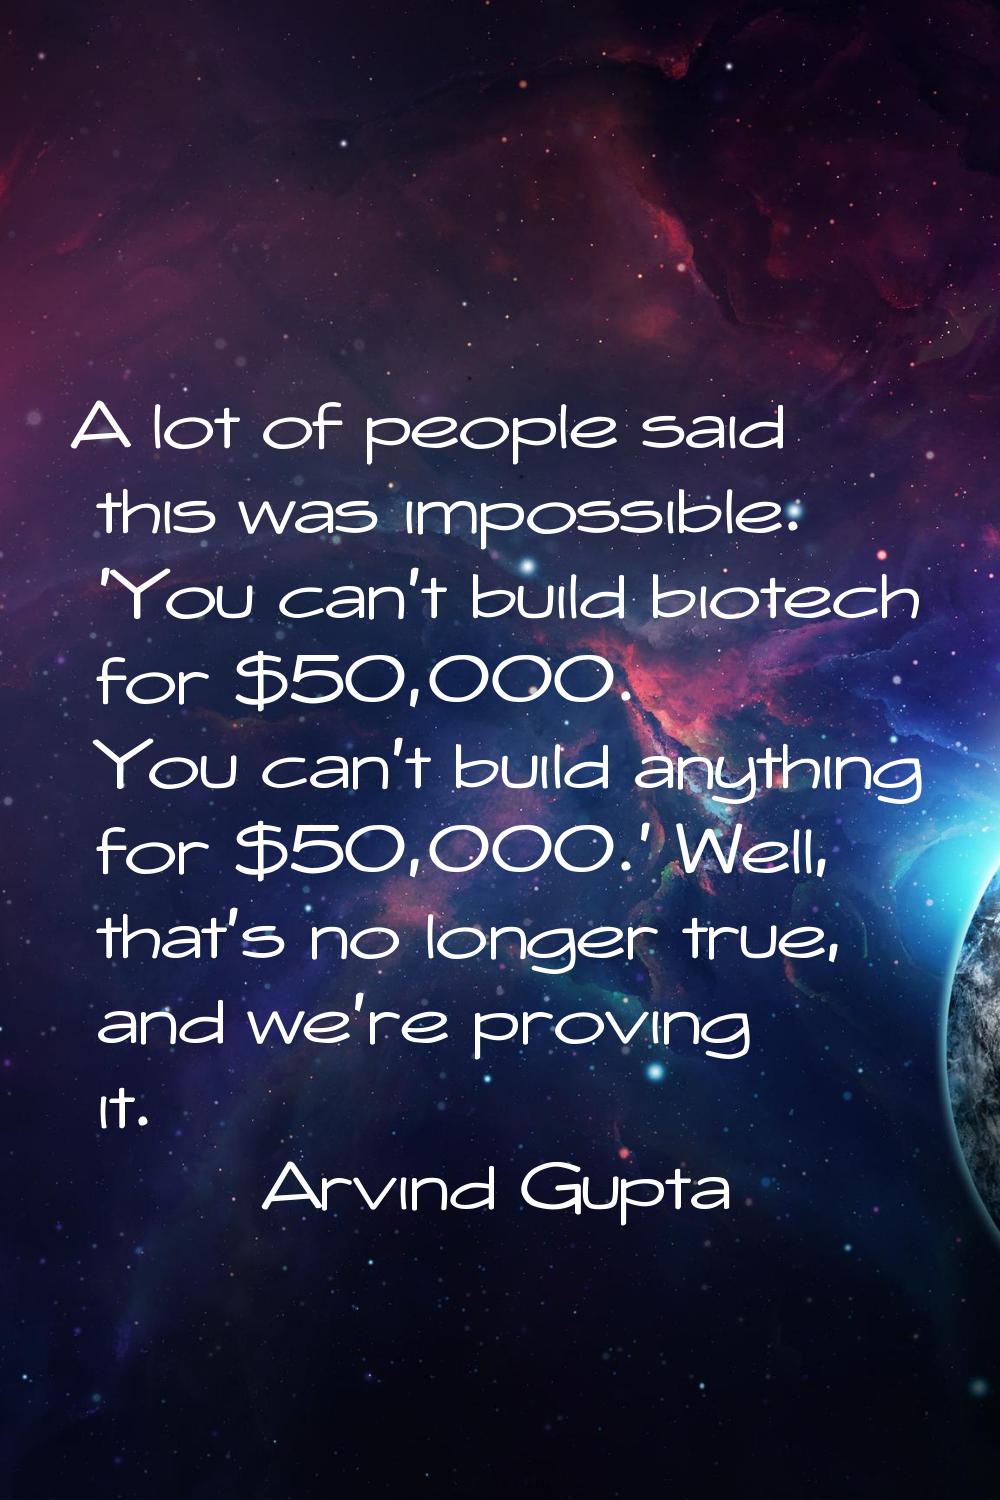 A lot of people said this was impossible. 'You can't build biotech for $50,000. You can't build any